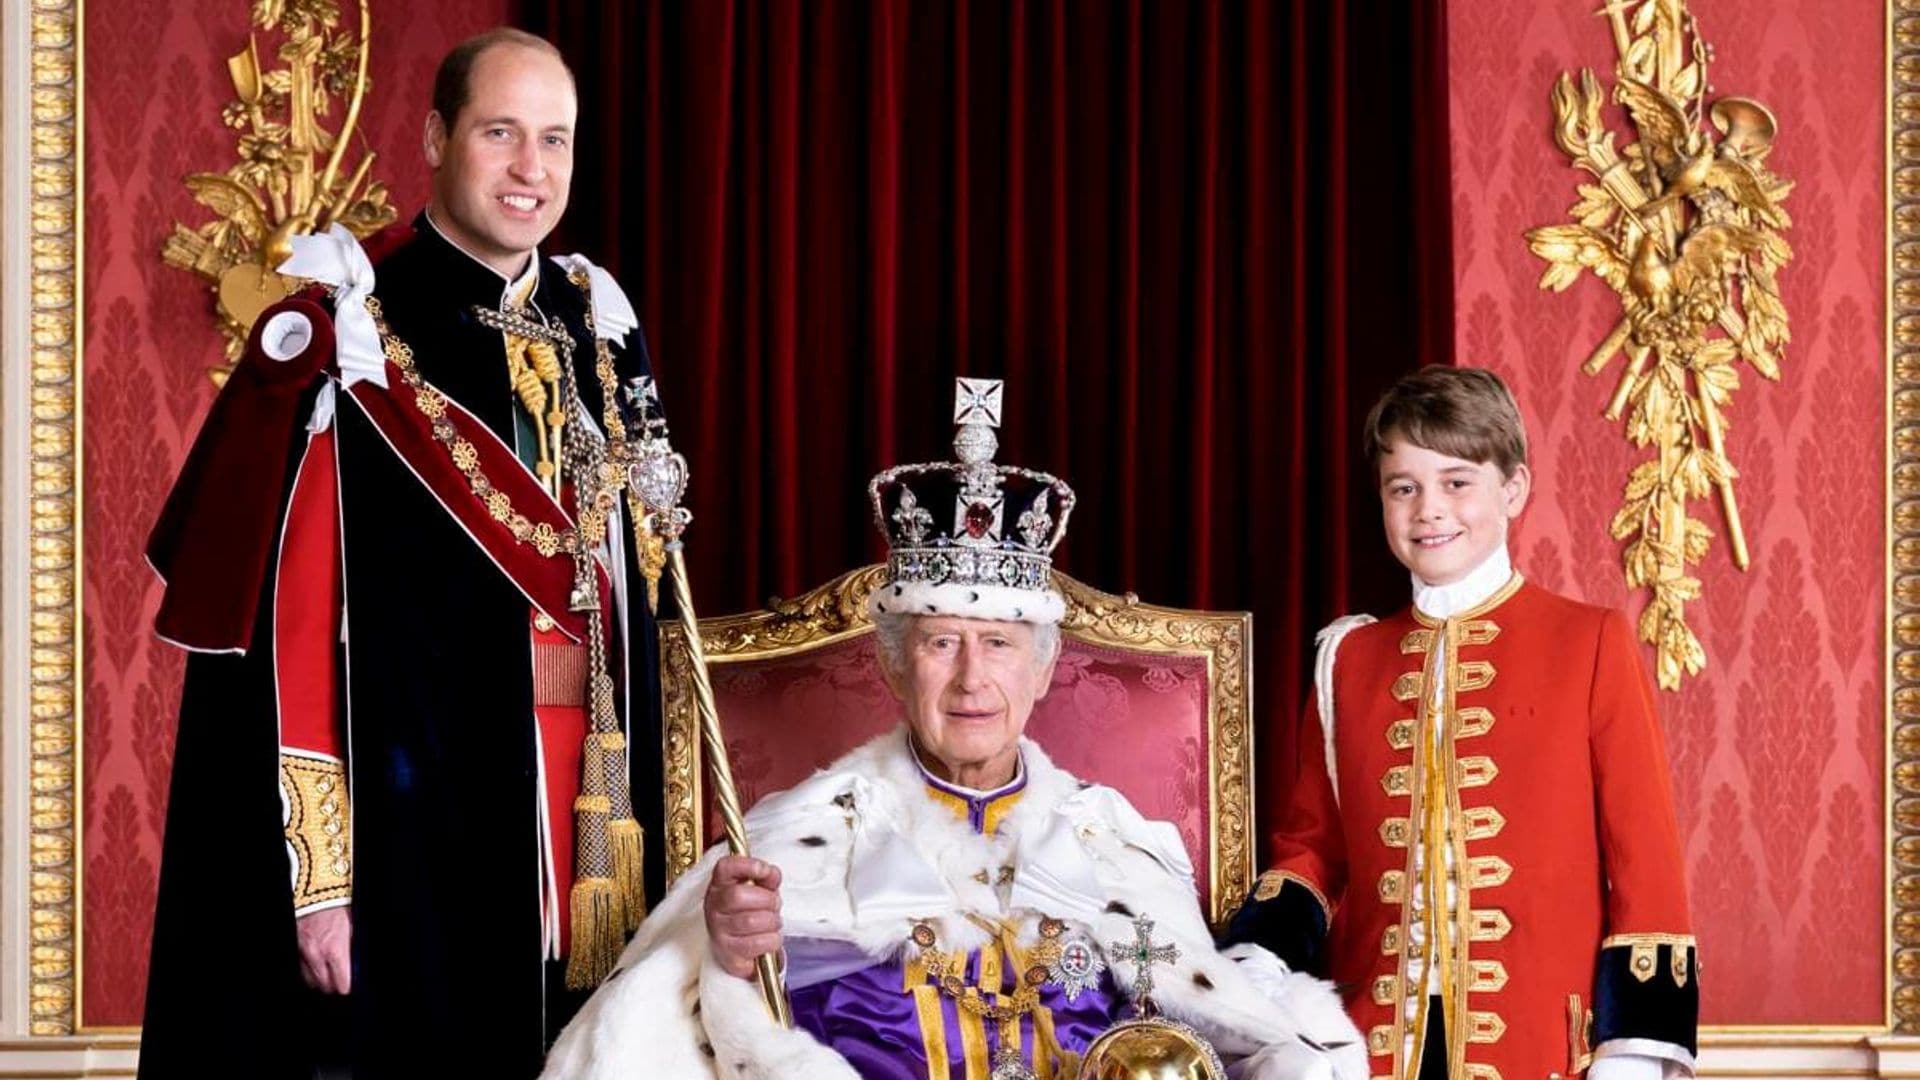 HIS MAJESTY THE KING WITH HIS ROYAL HIGHNESS THE PRINCE OF WALES AND HIS ROYAL HIGHNESS PRINCE GEORGE OF WALES, IN THE THRONE ROOM.